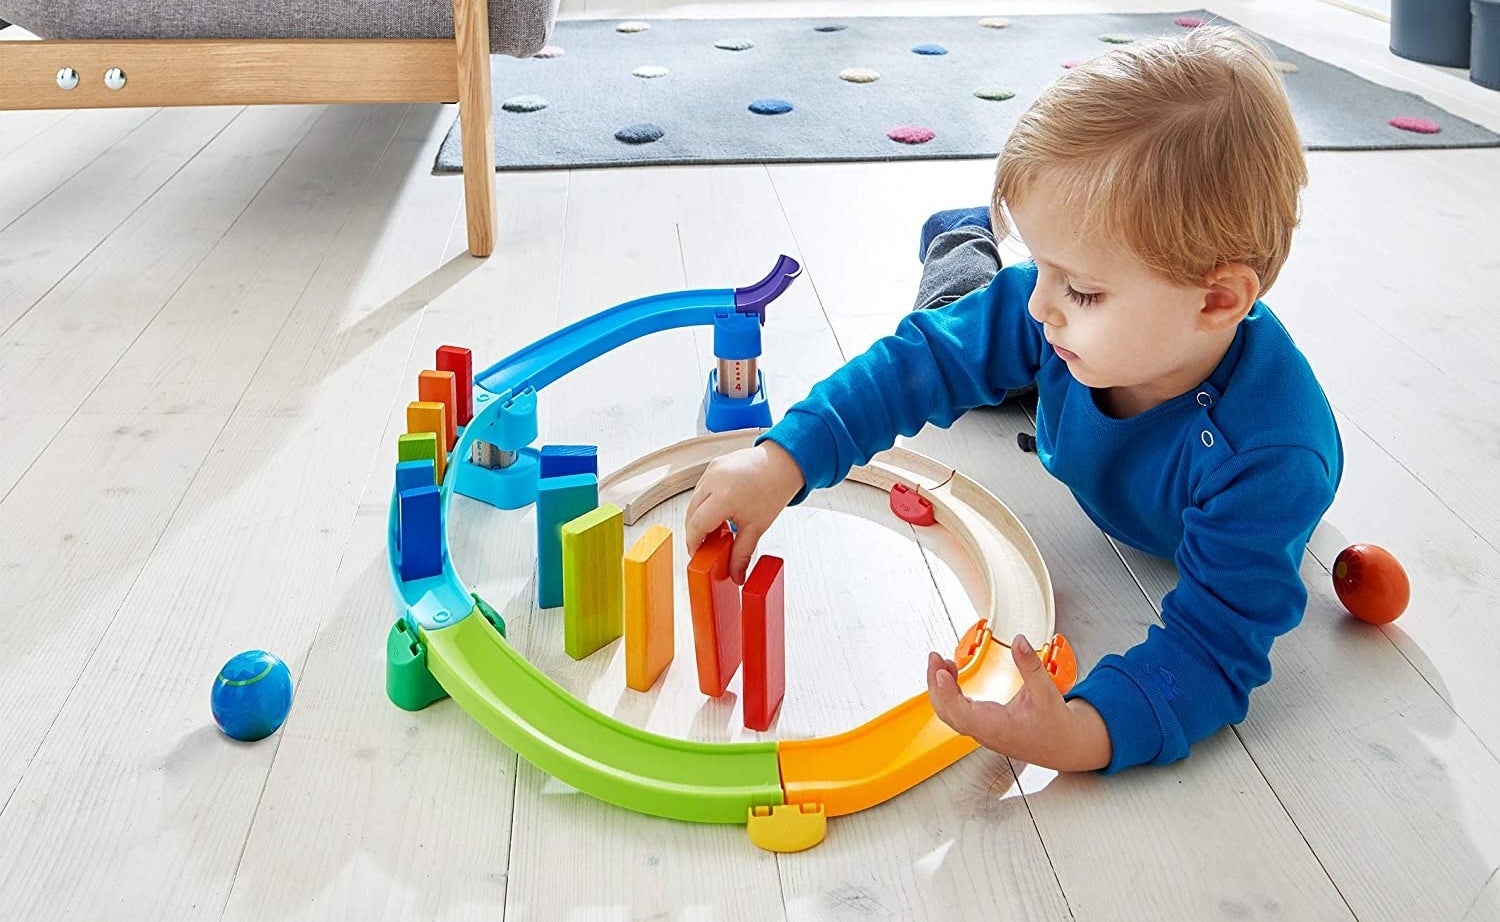 Child model playing with colorful domino playset